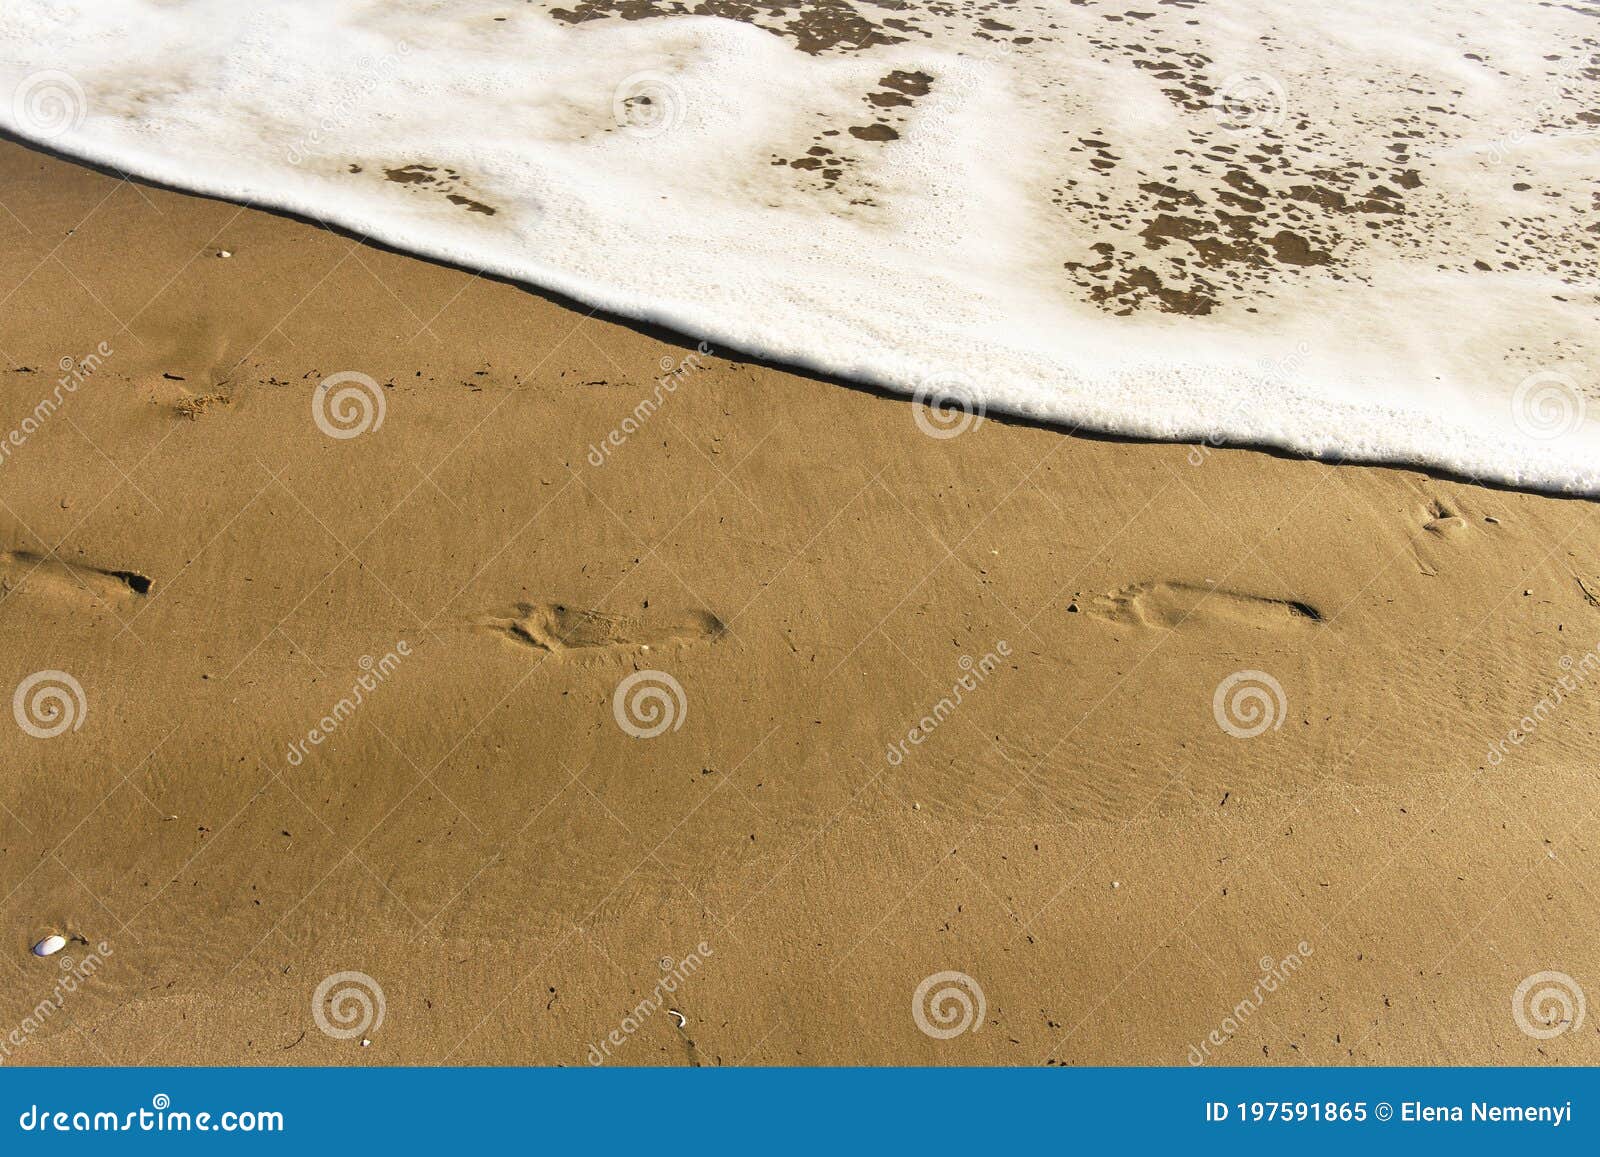 adult foot prints by the ocean shore